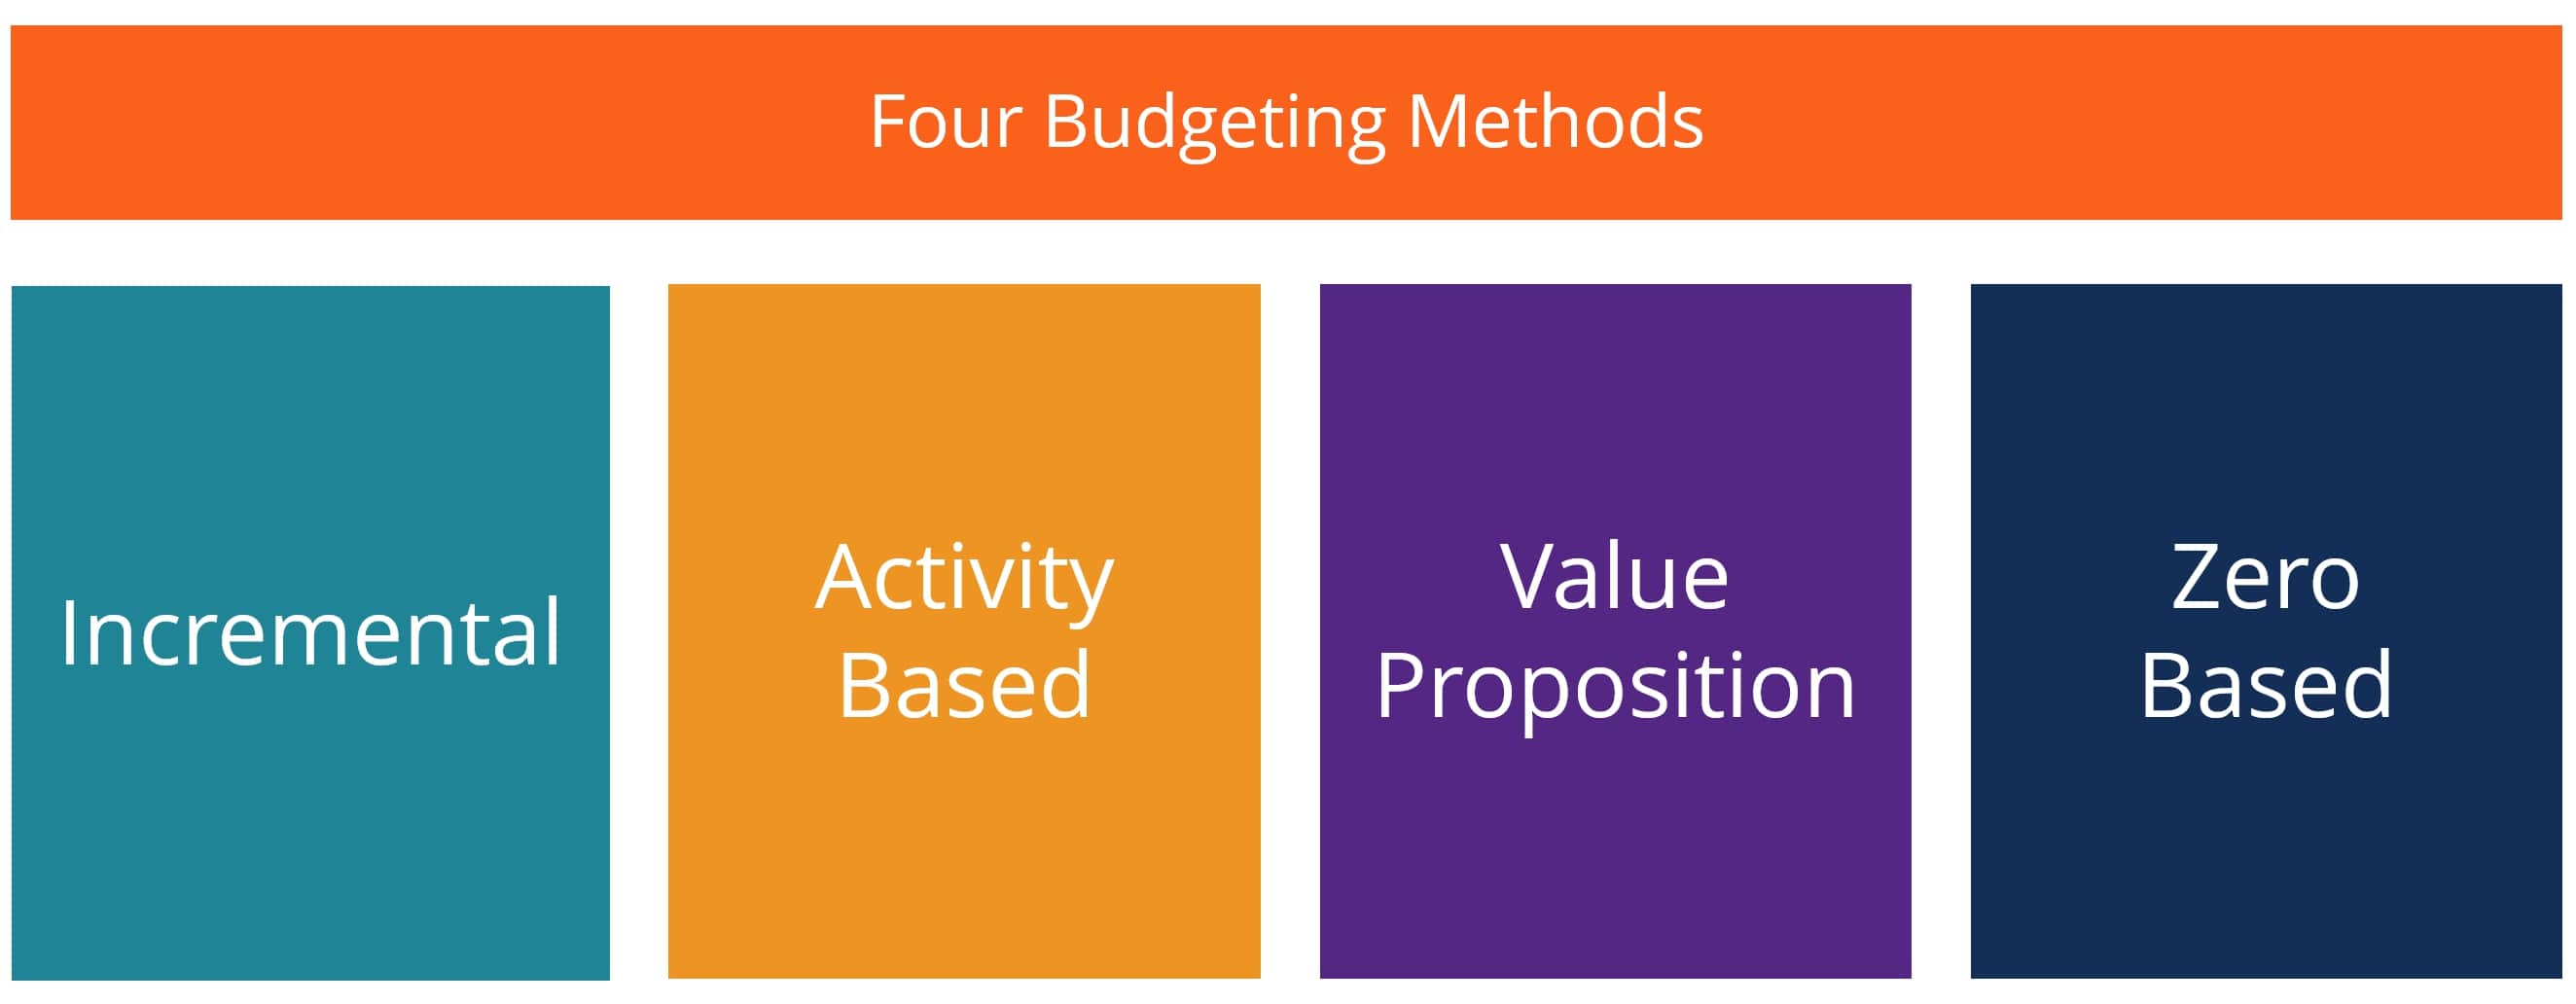 Which Budgeting Approach Is Most Favorable To Obtain Employee Support